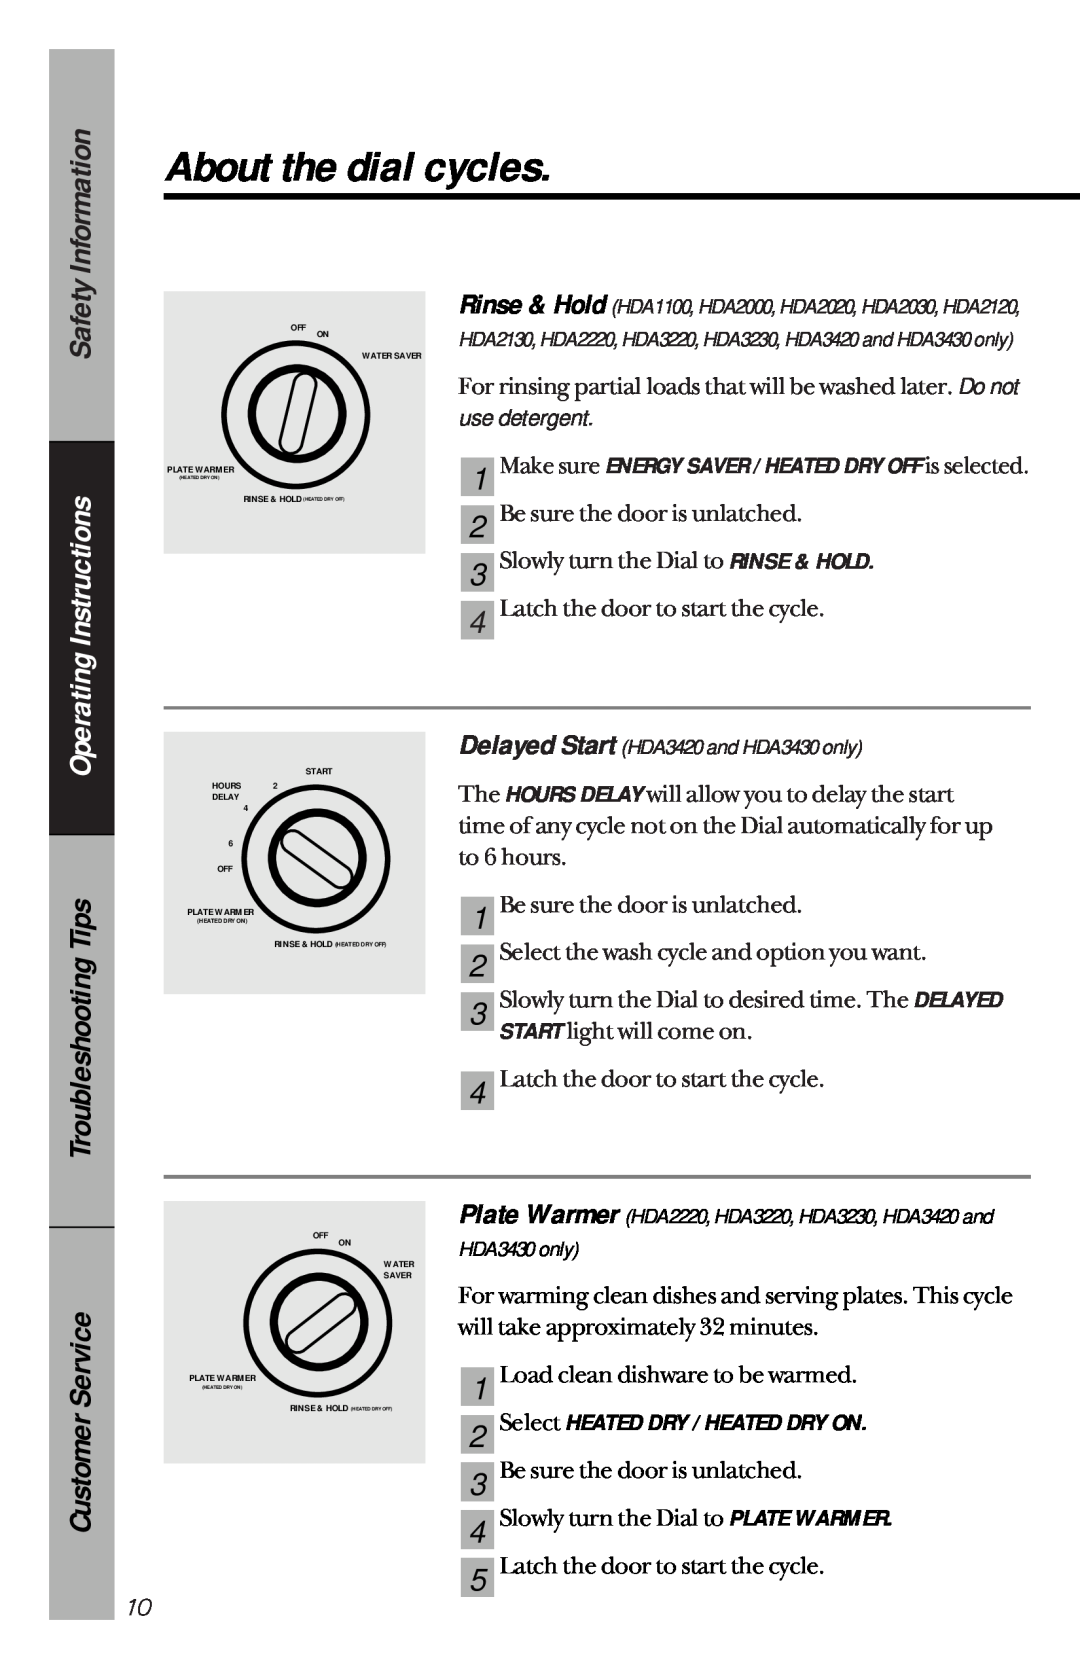 Hotpoint HDA2120 About the dial cycles, Service, Customer, use detergent, Safety Information, Operating Instructions 